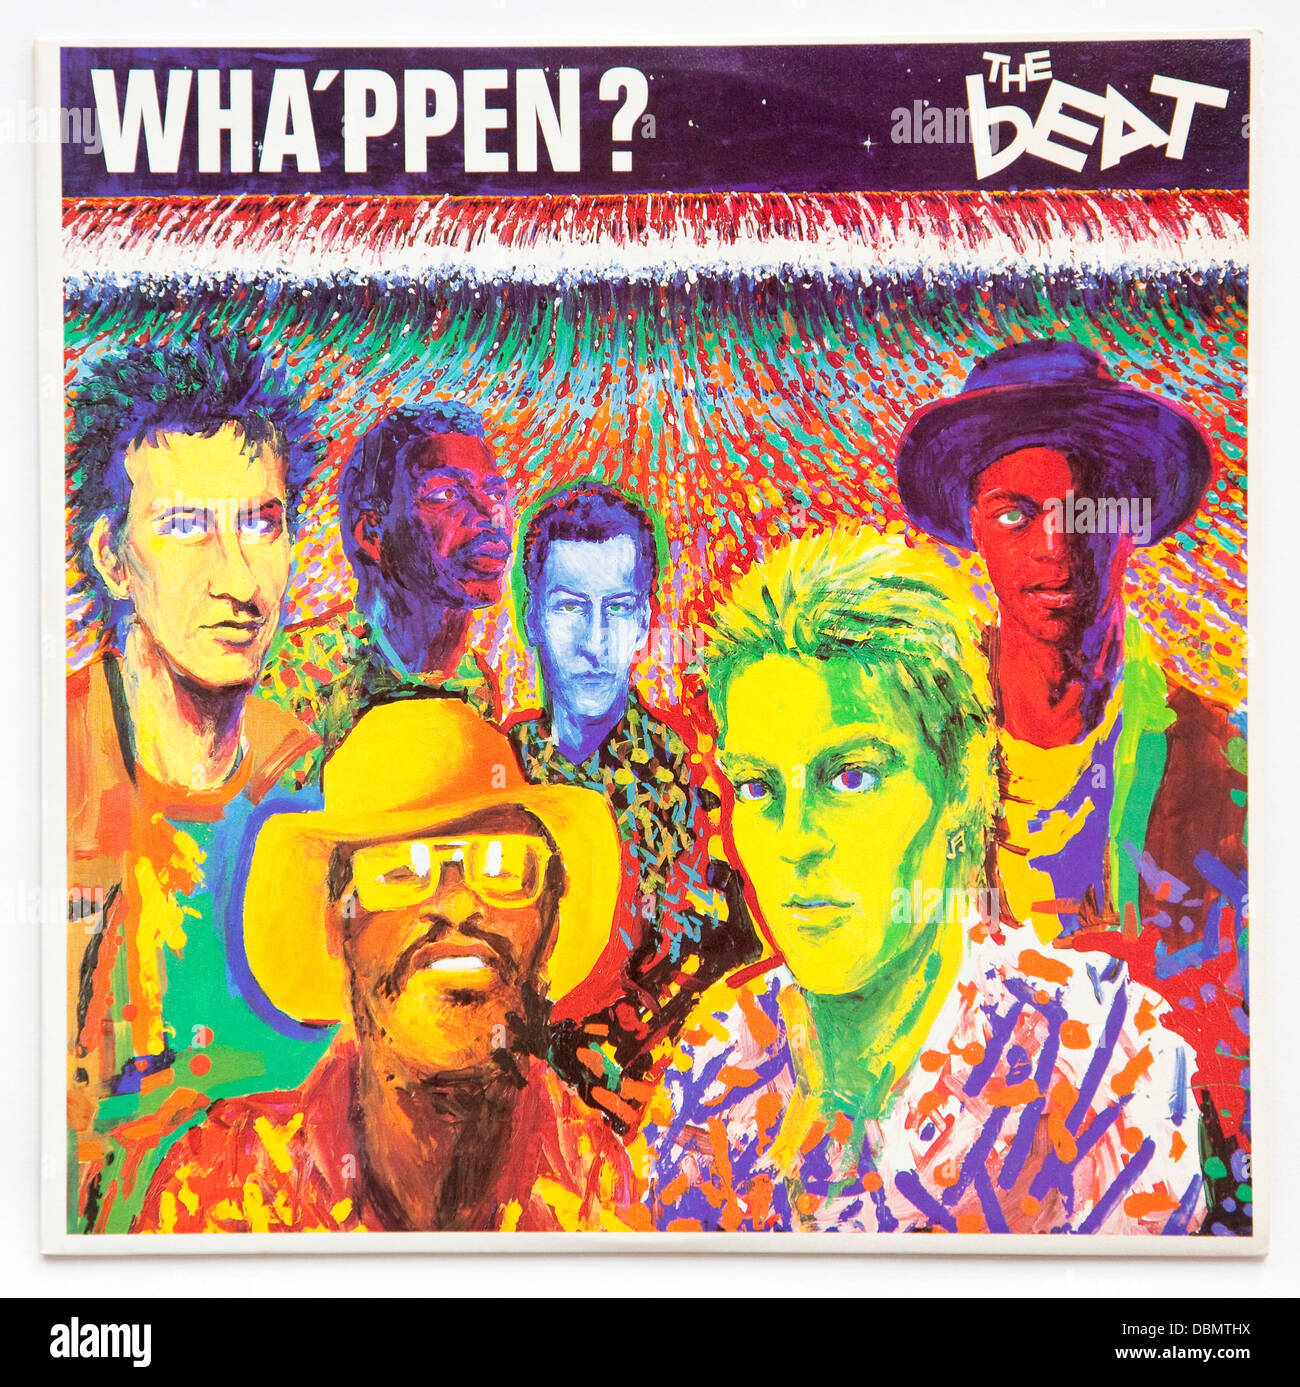 The Beat - Wha'ppen? 1981 album cover designed by Hunt Emerson - Editorial use only Stock Photo